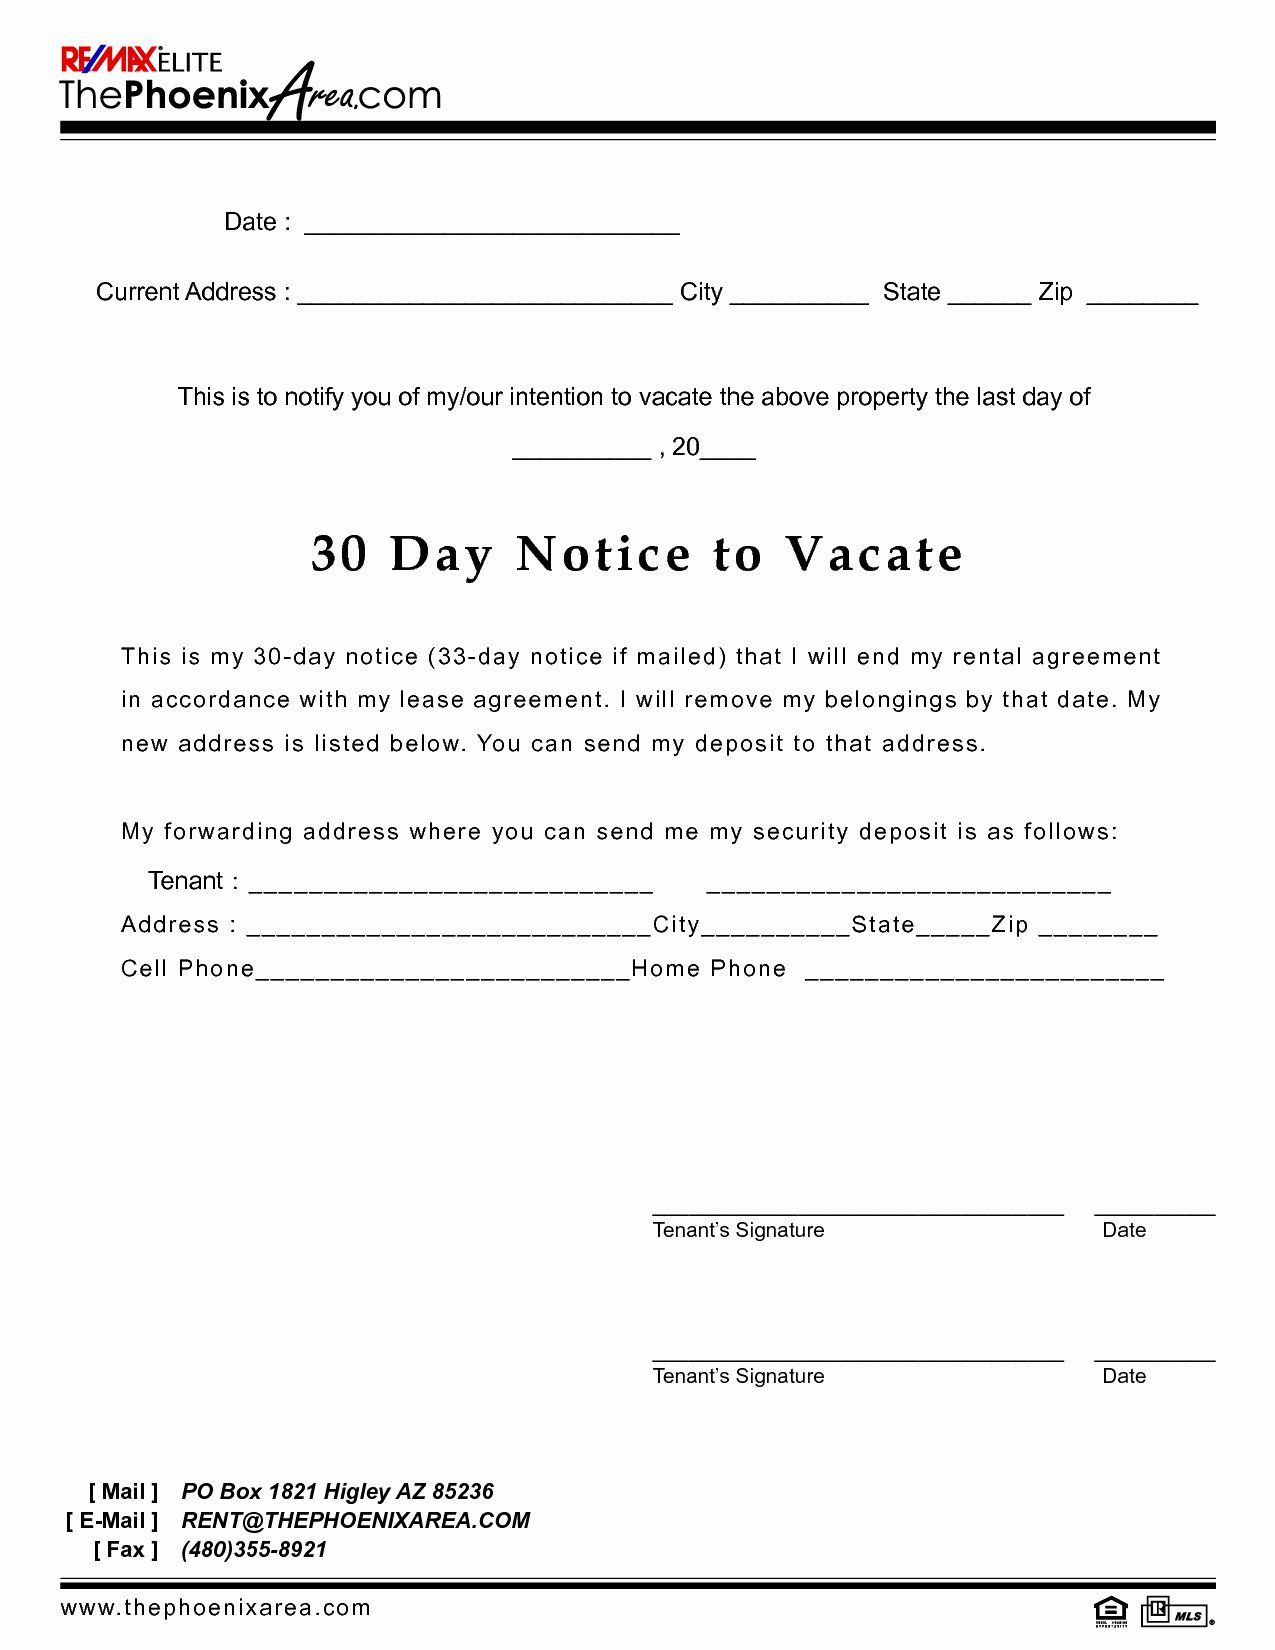 30 Day Eviction Notice Template Awesome 30 30 Day Eviction intended for 30 Day Eviction Letter Template